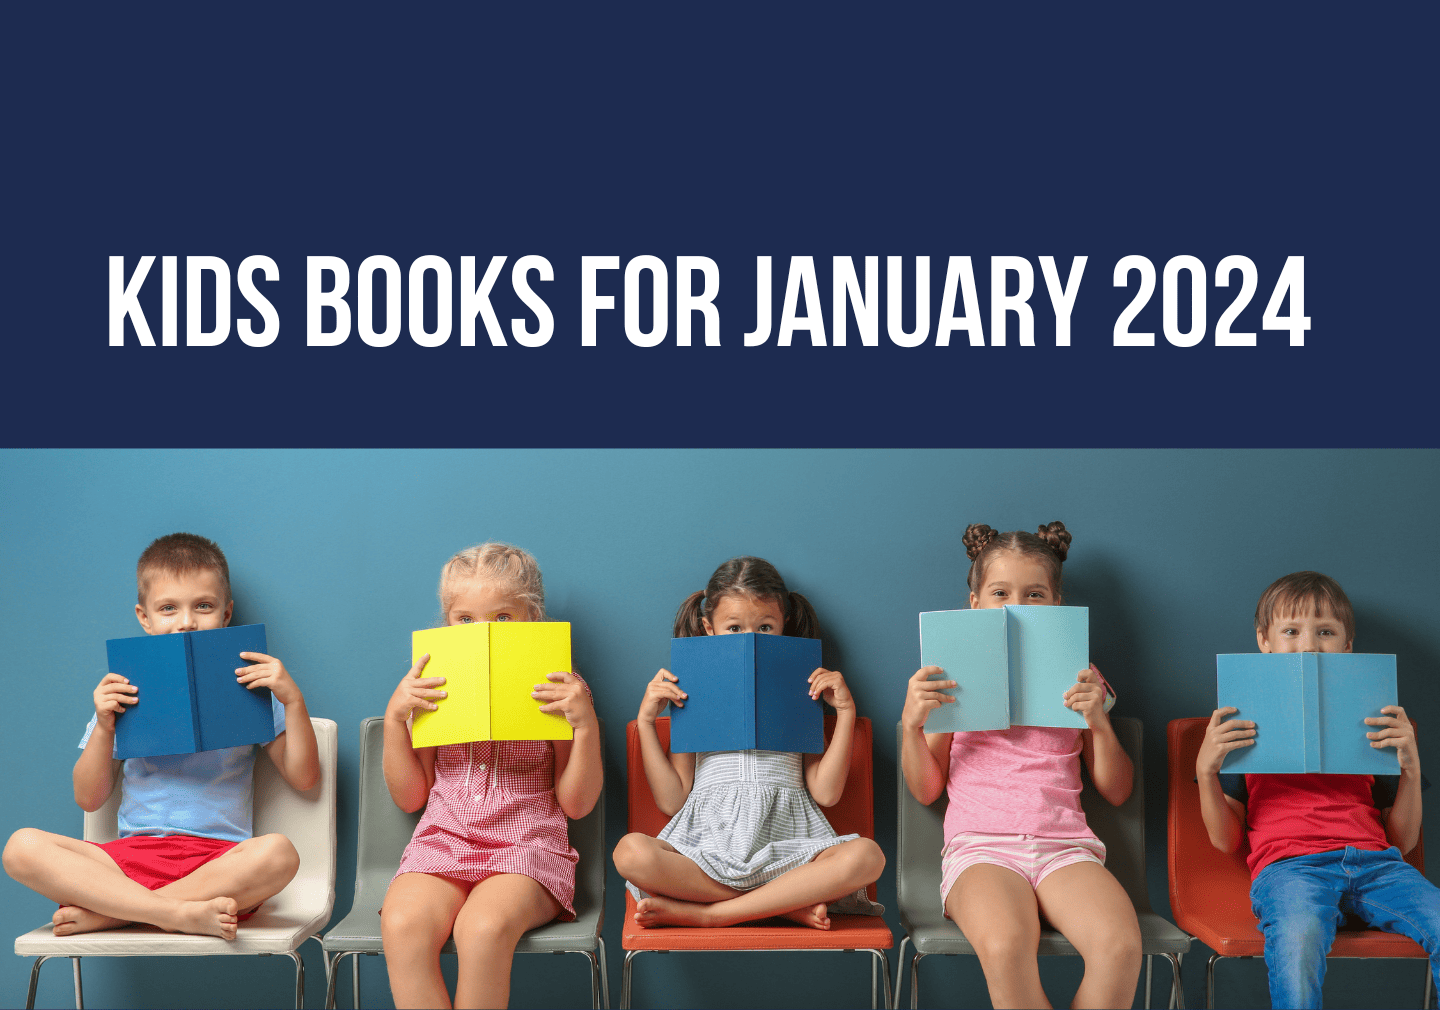 Recommended kids books for January 2024